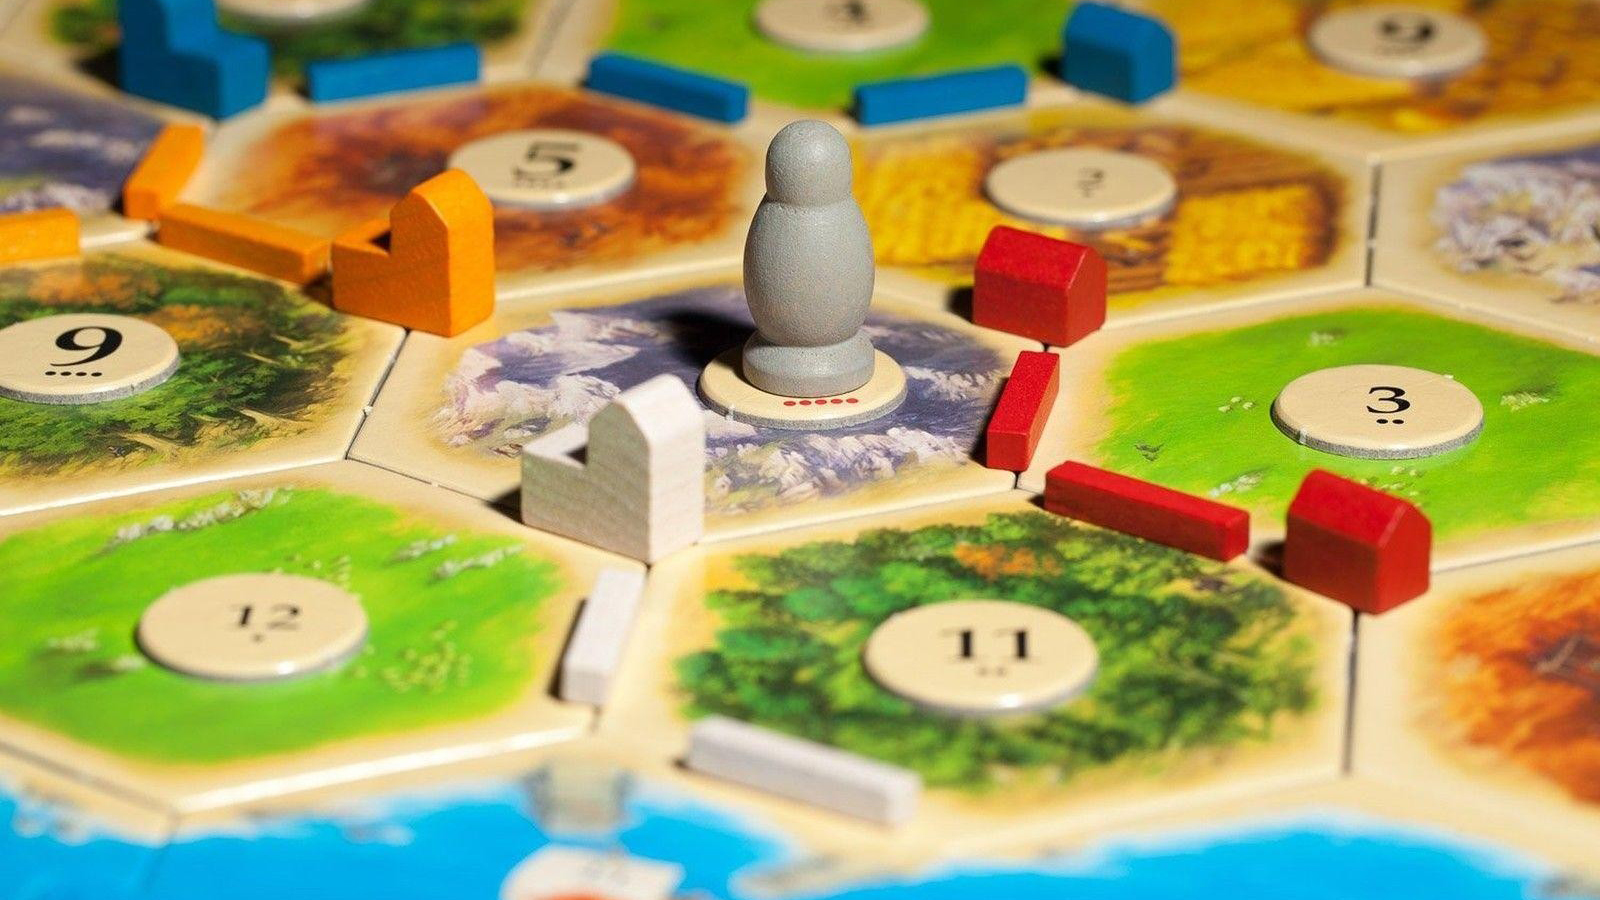 Monopoly Go! is a rather ruthless take on the classic board game